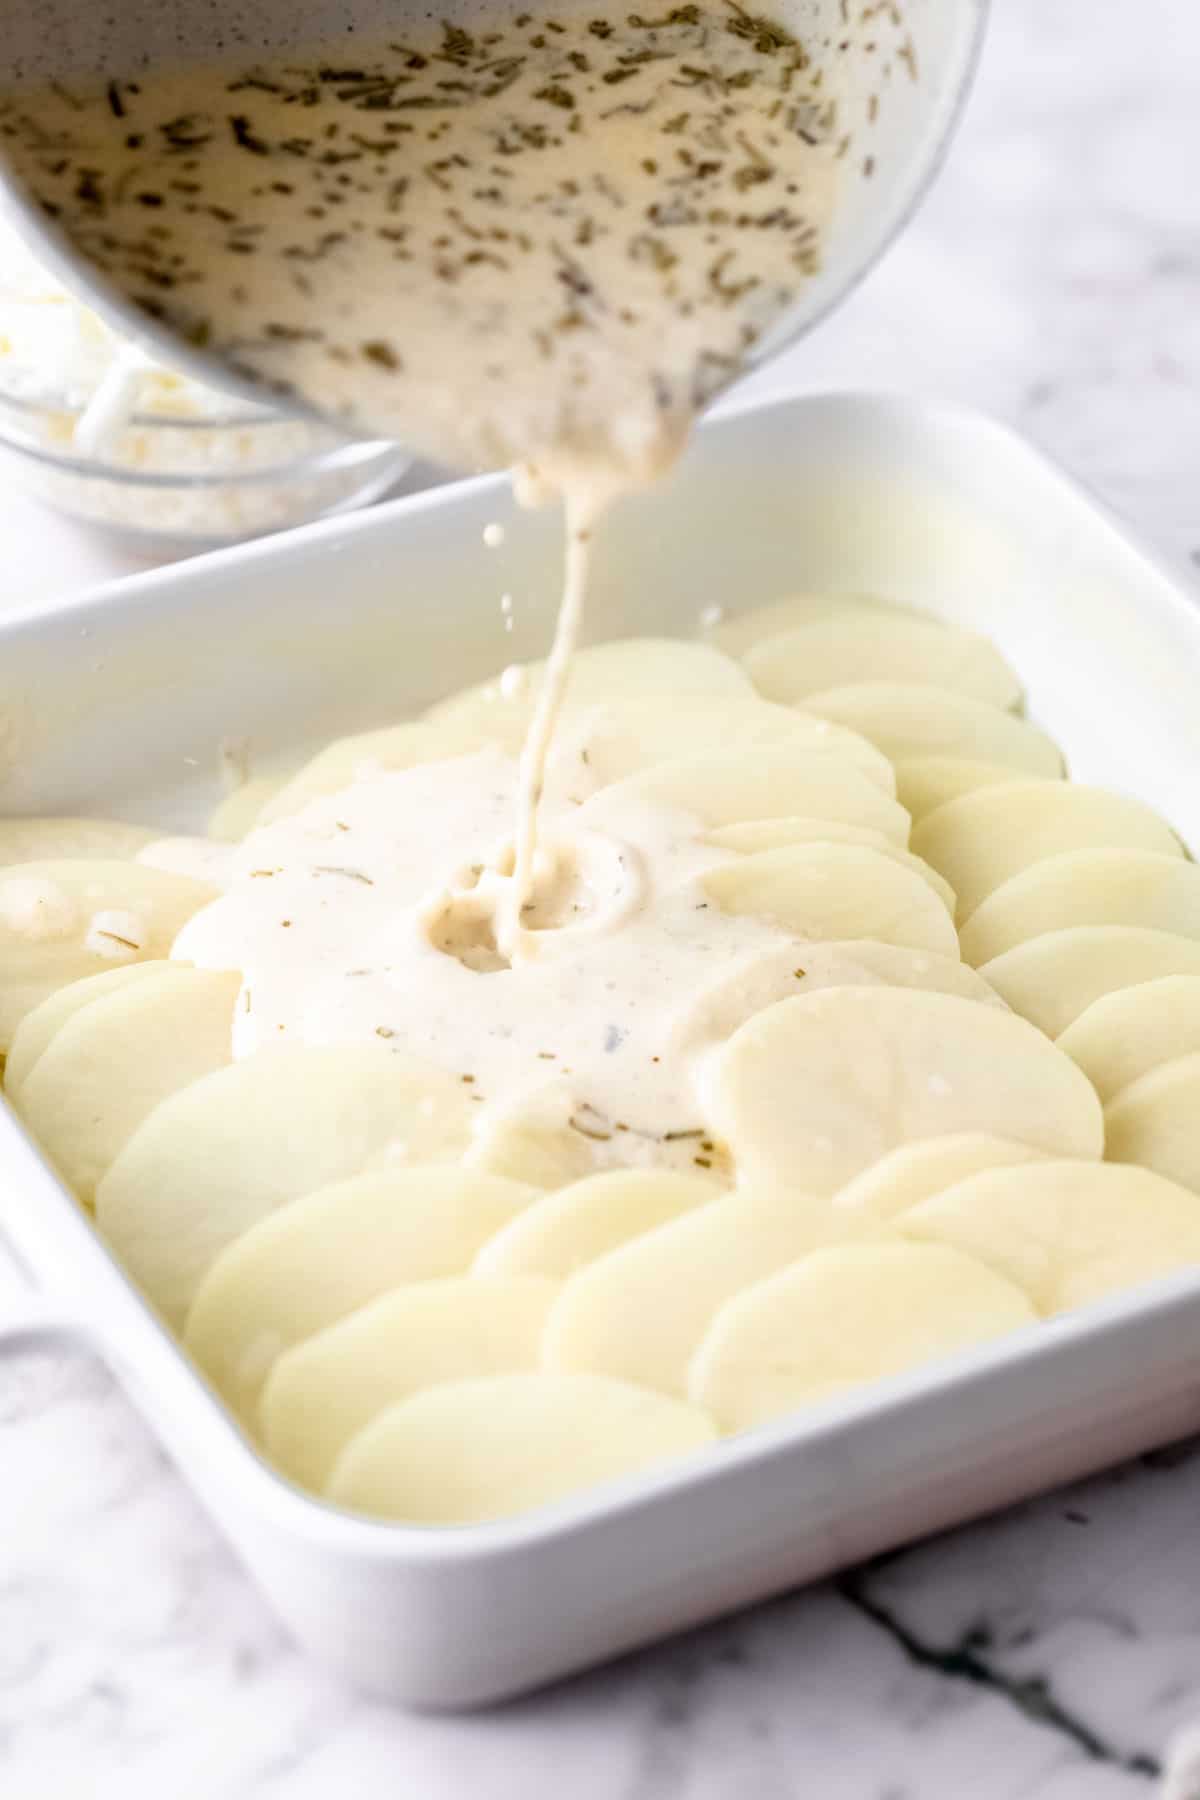 Cream sauce is poured from a saucepan over top potato slices in a baking dish.